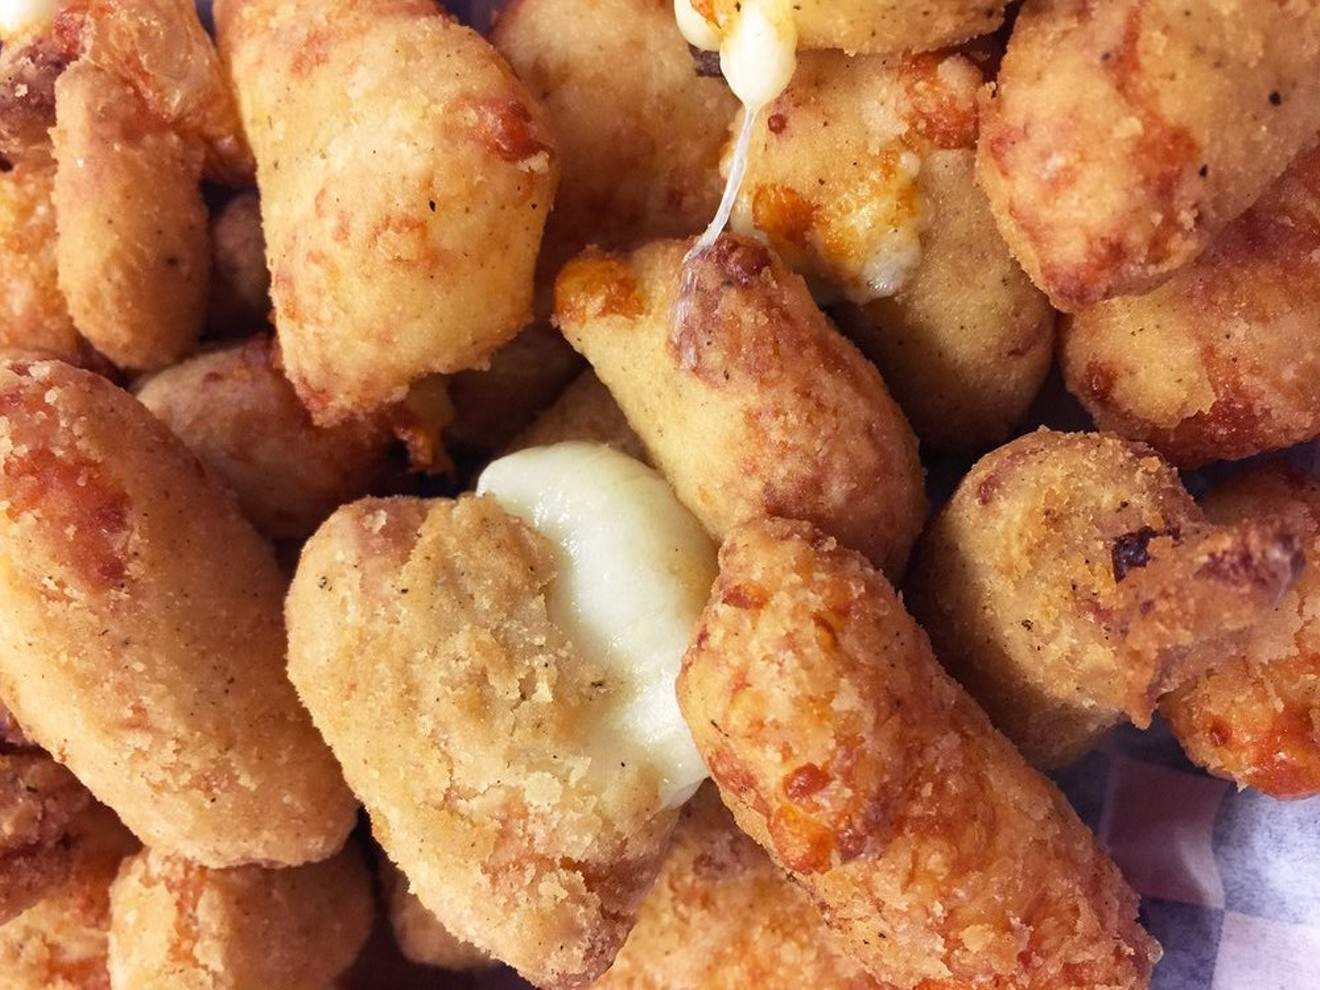 Here's where to find fried cheese curds across metro Phoenix.